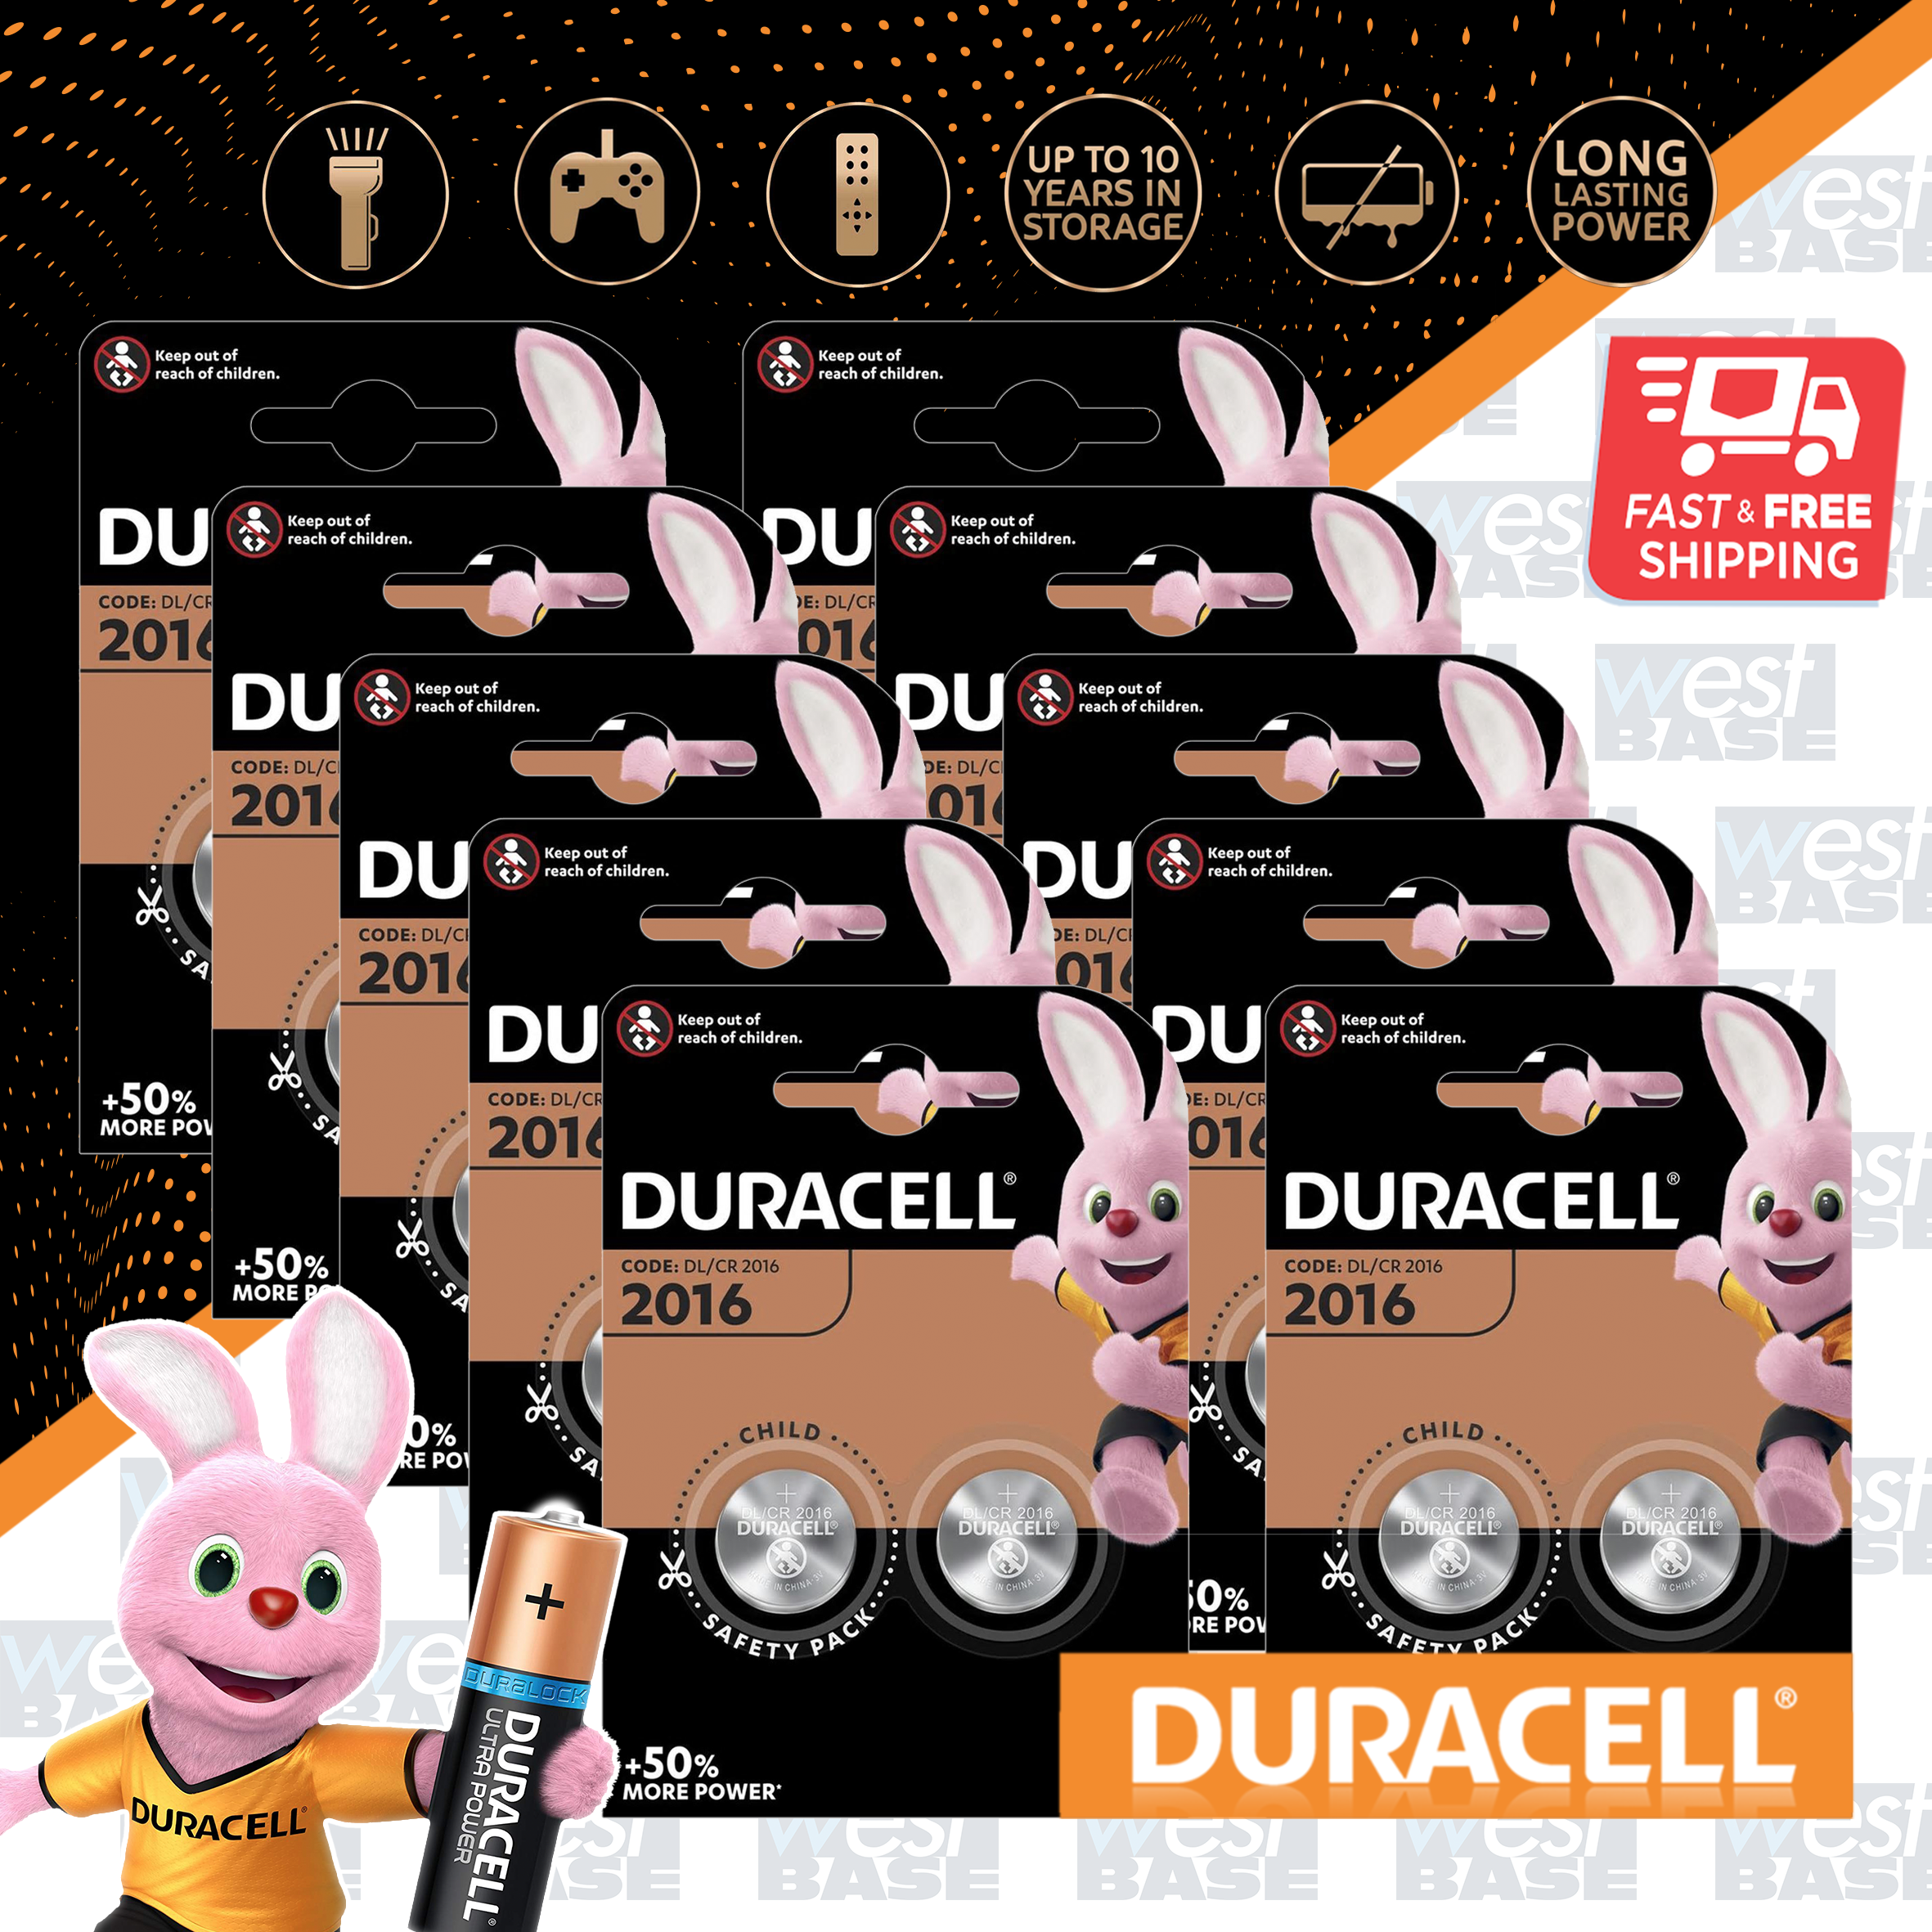 cr2016 battery equivalent duracell